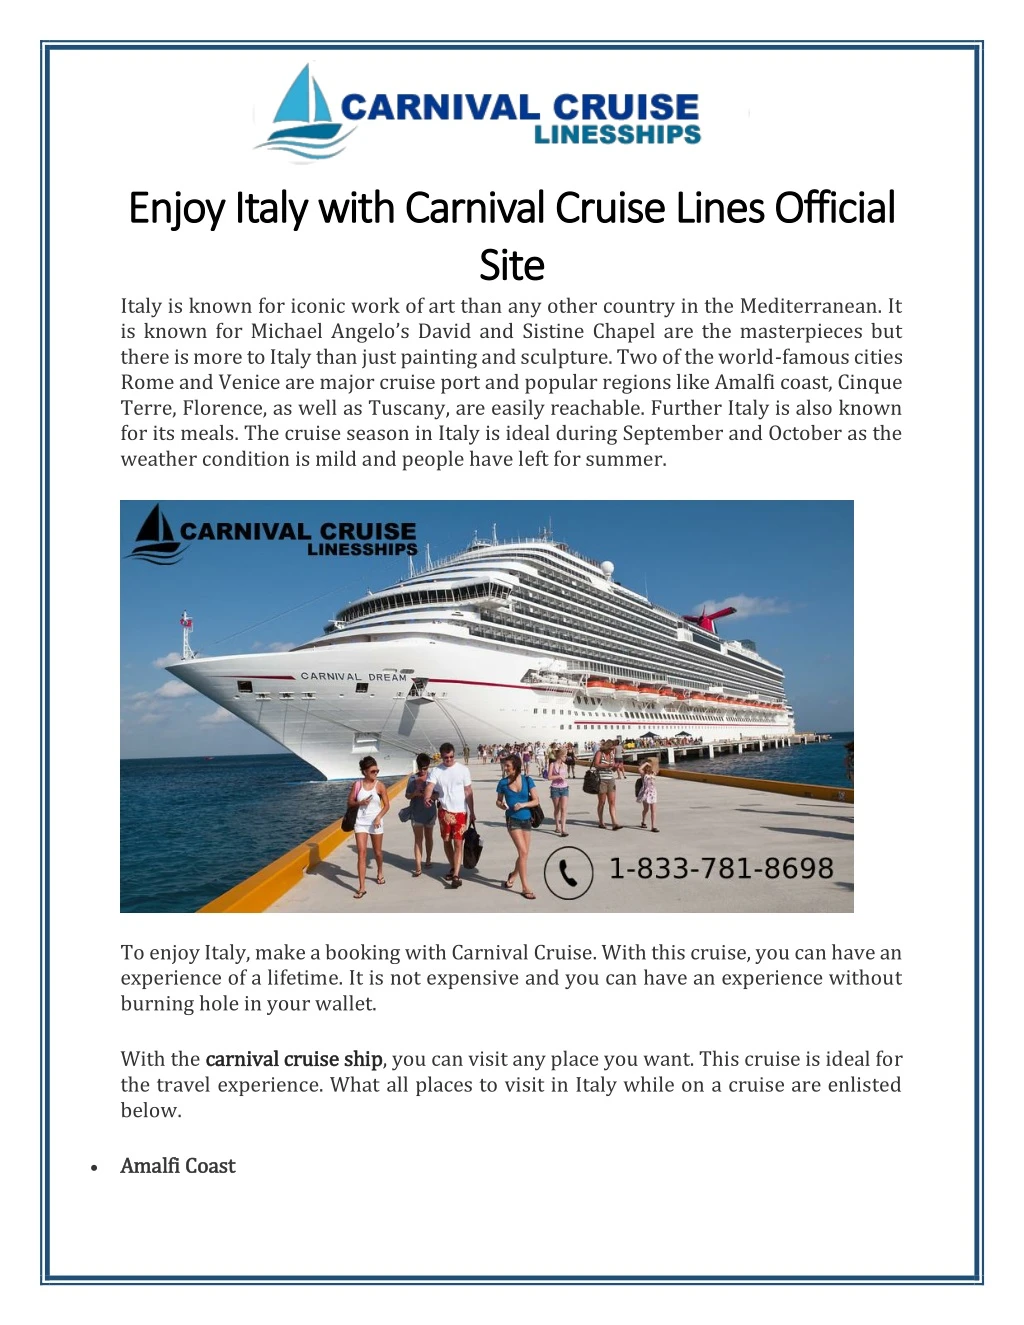 enjoy italy with carnival cruise lines official